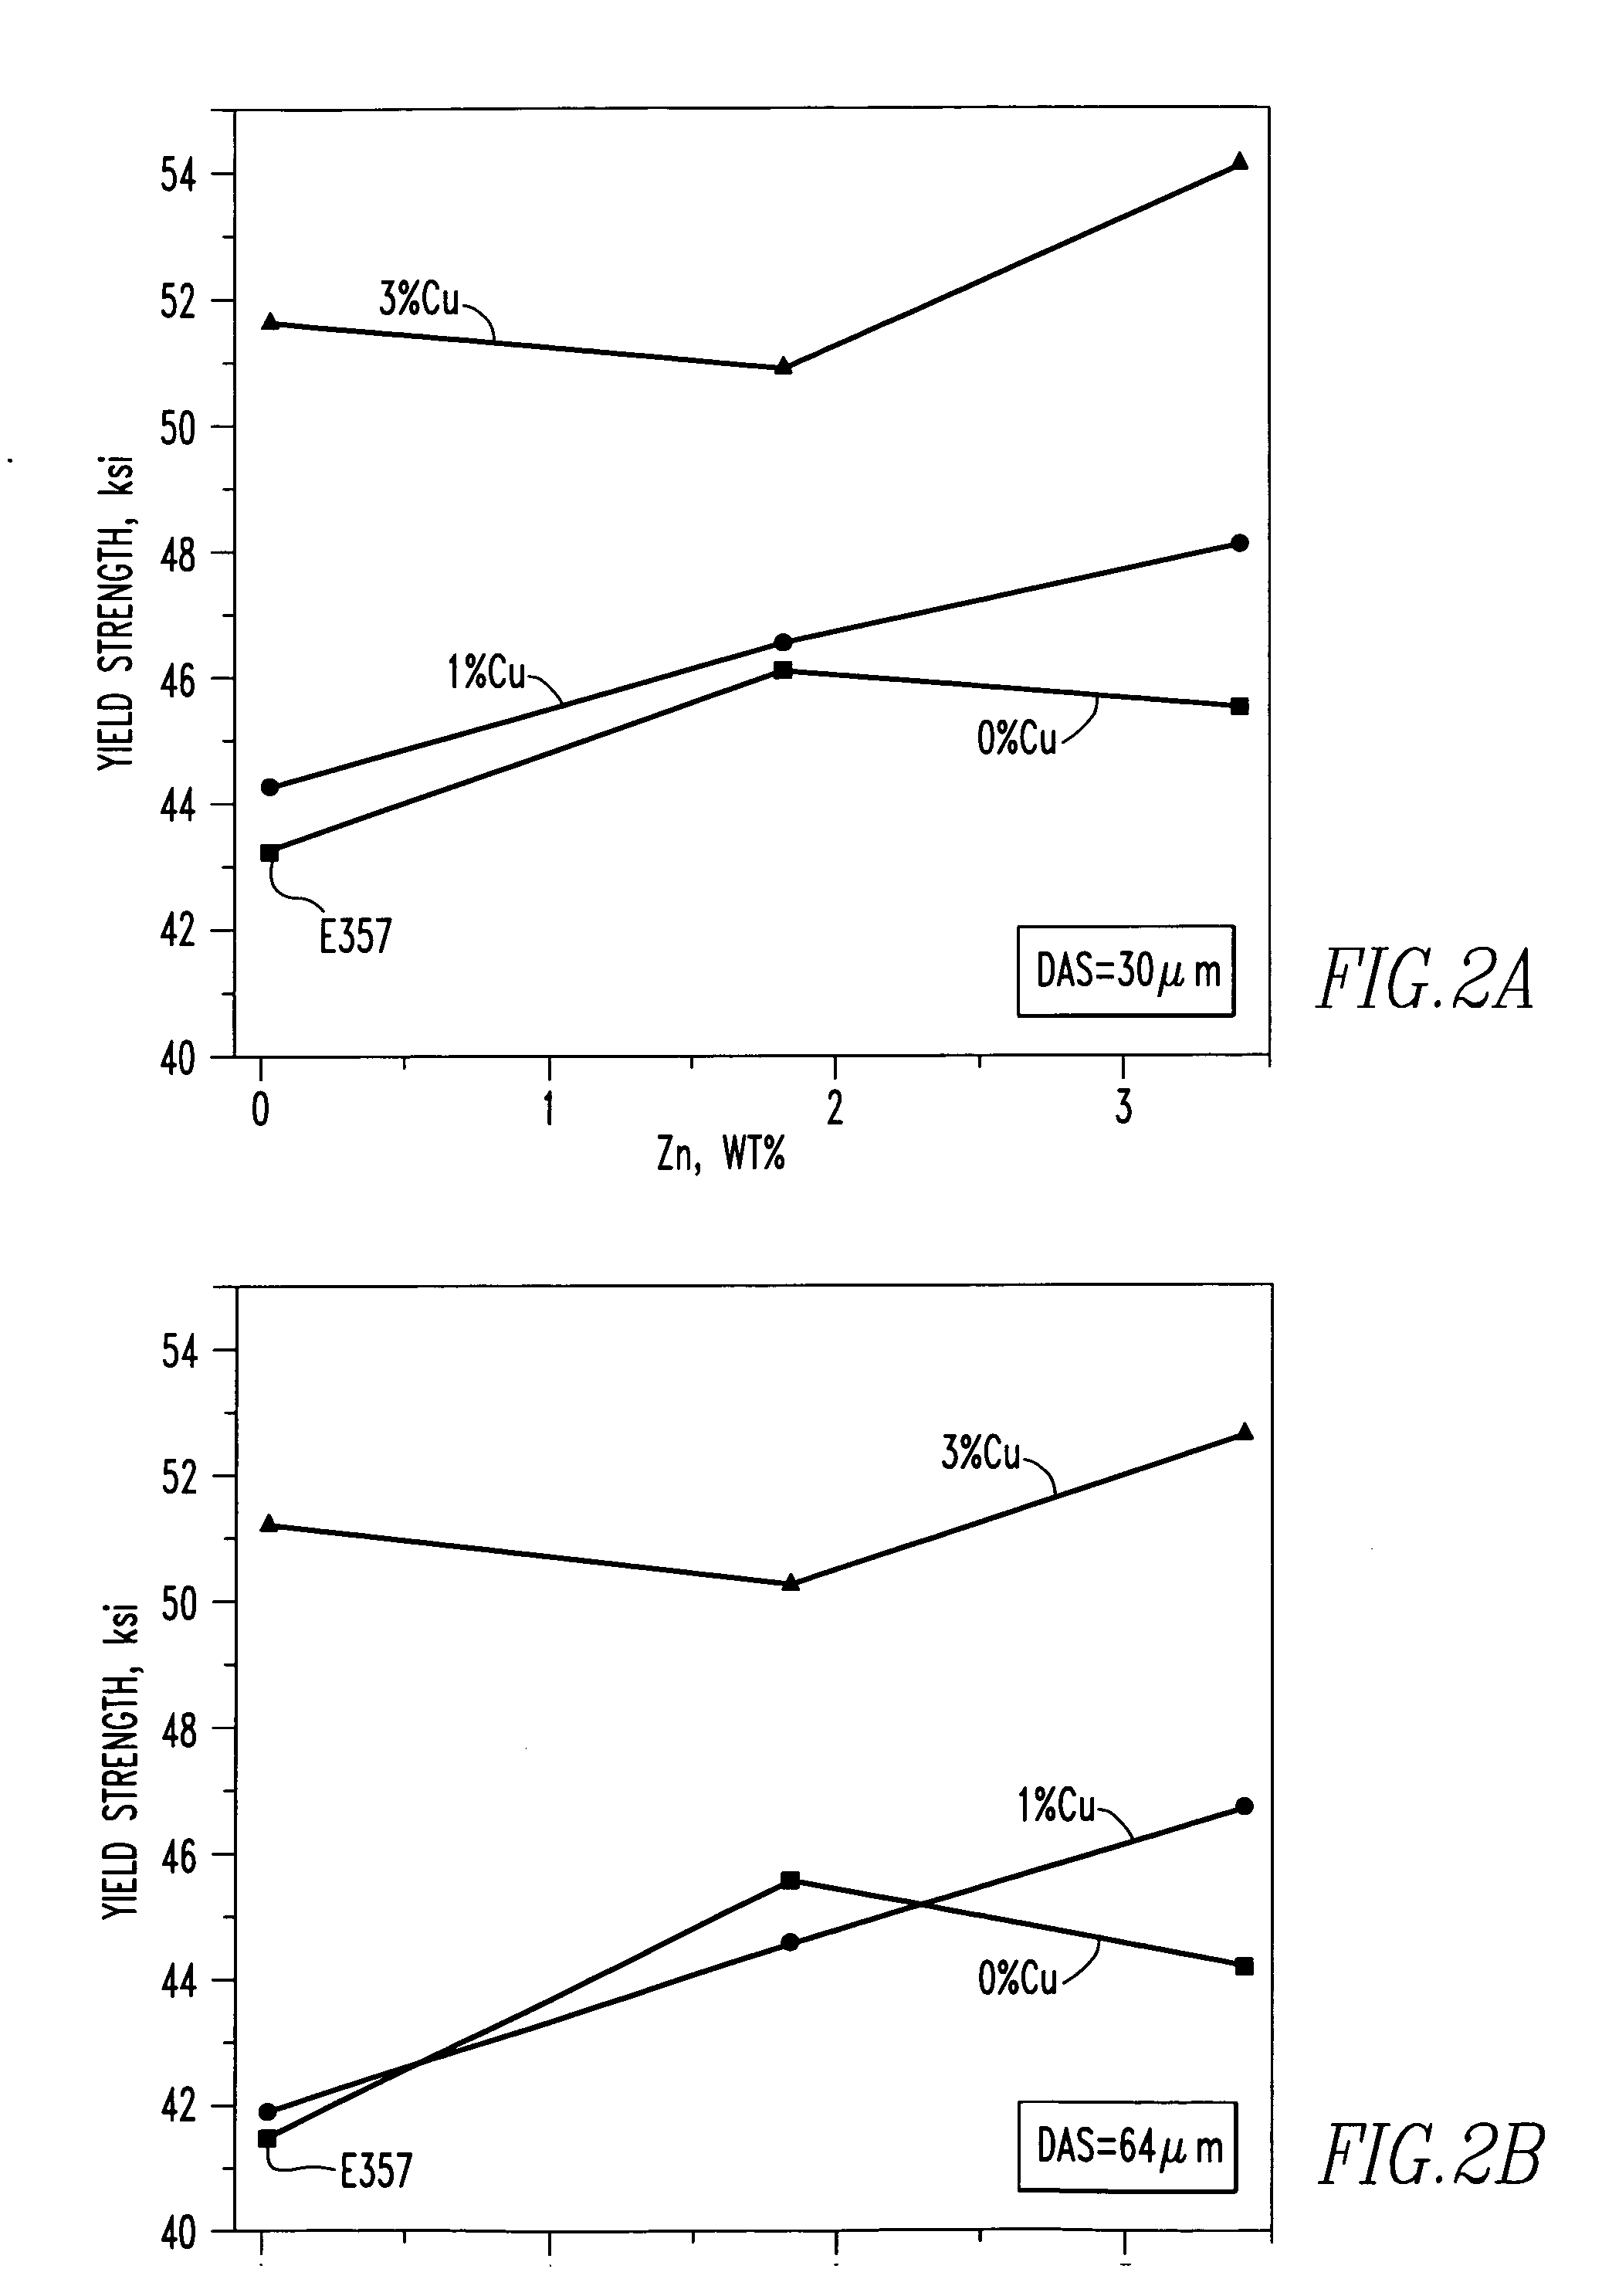 An Al-Si-Mg-Zn-Cu alloy for aerospace and automotive castings